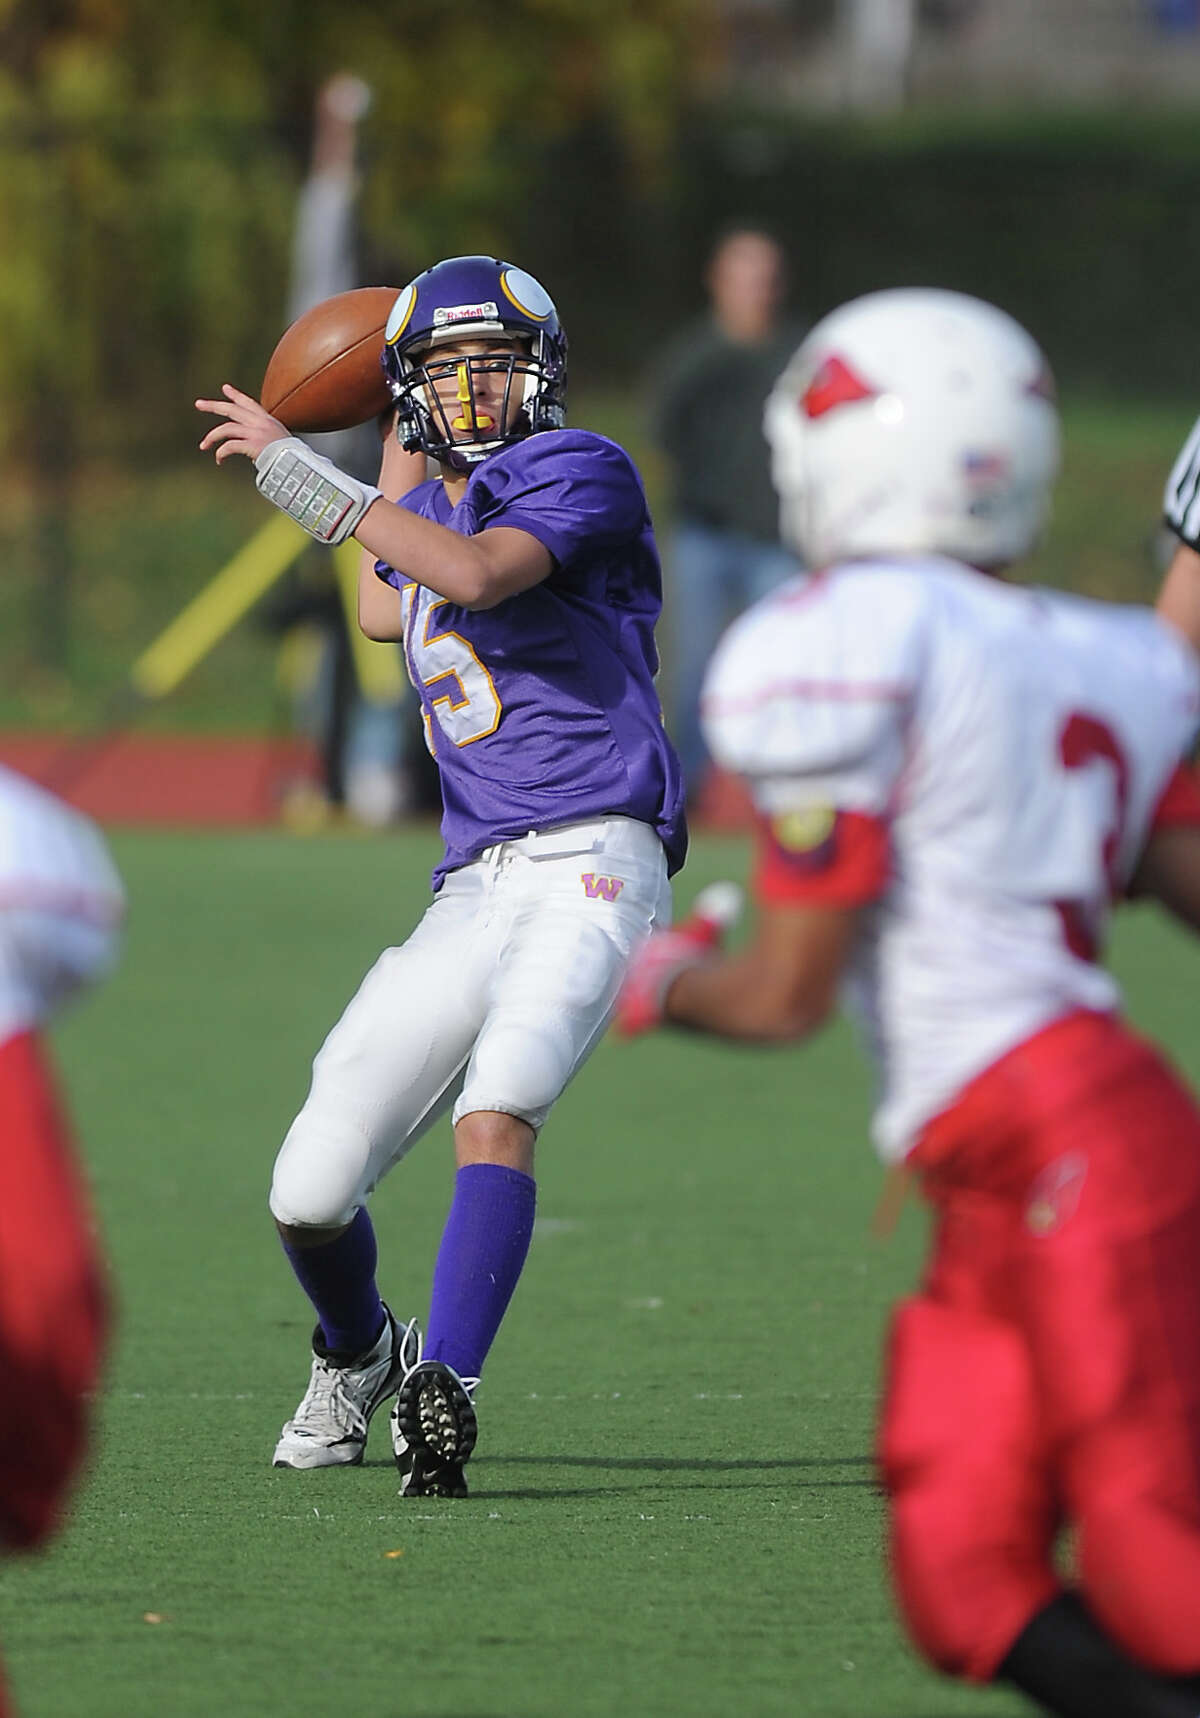 Westhill High School quarterback Peter Cernansky looks to throw against Greenwich High School in football action in Stamford, Conn. on Saturday October 30, 2010.